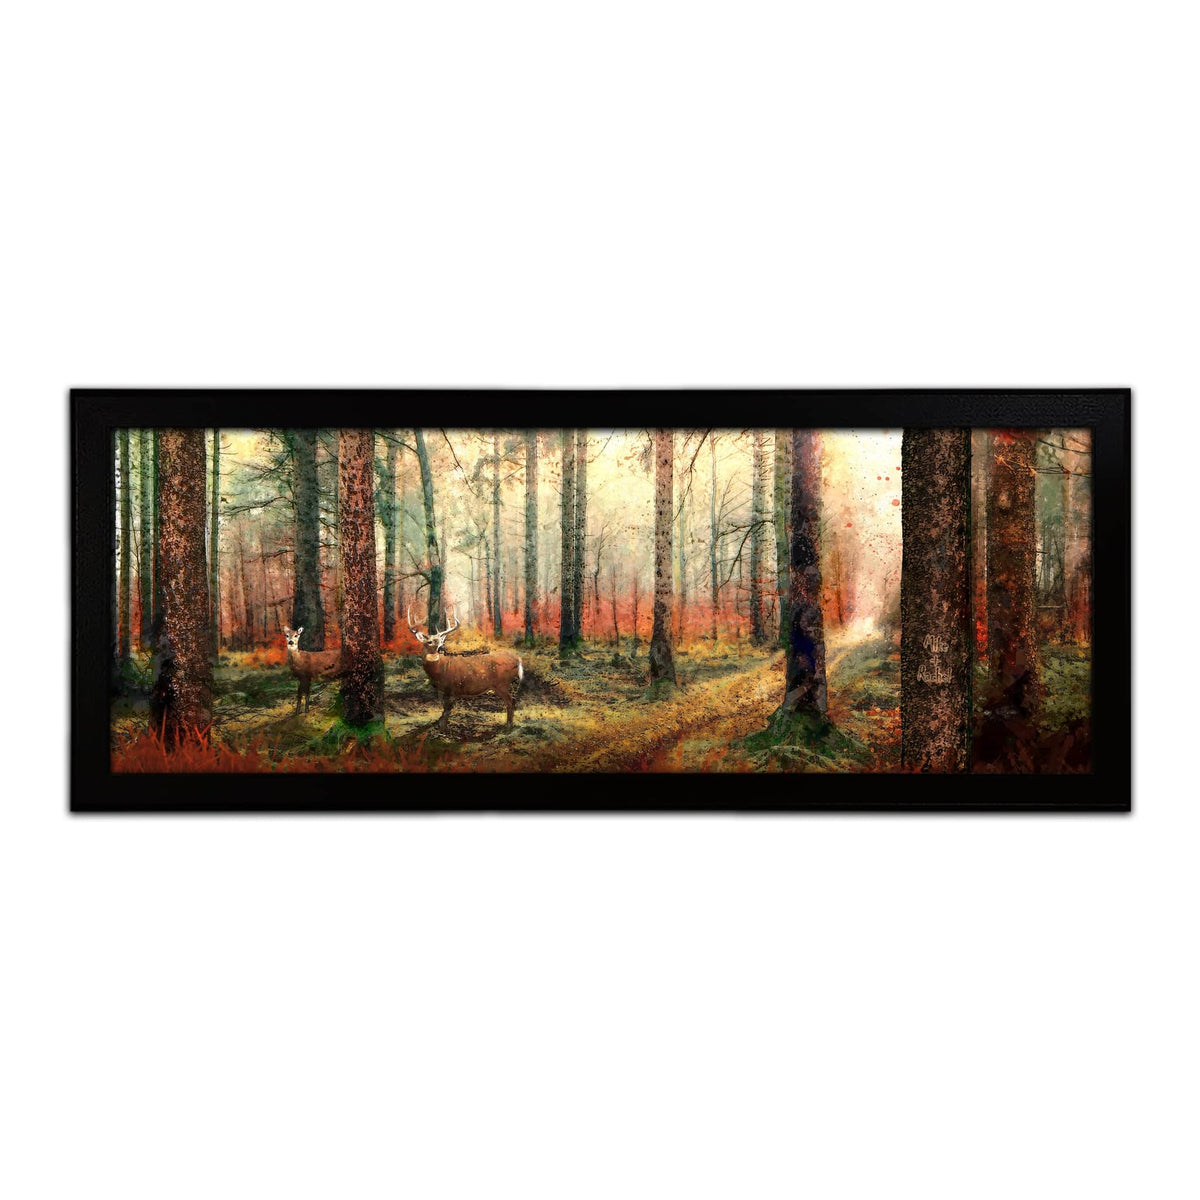 Framed Canvas Art Nature Decor with sun rays through trees and two deer from Personal Prints